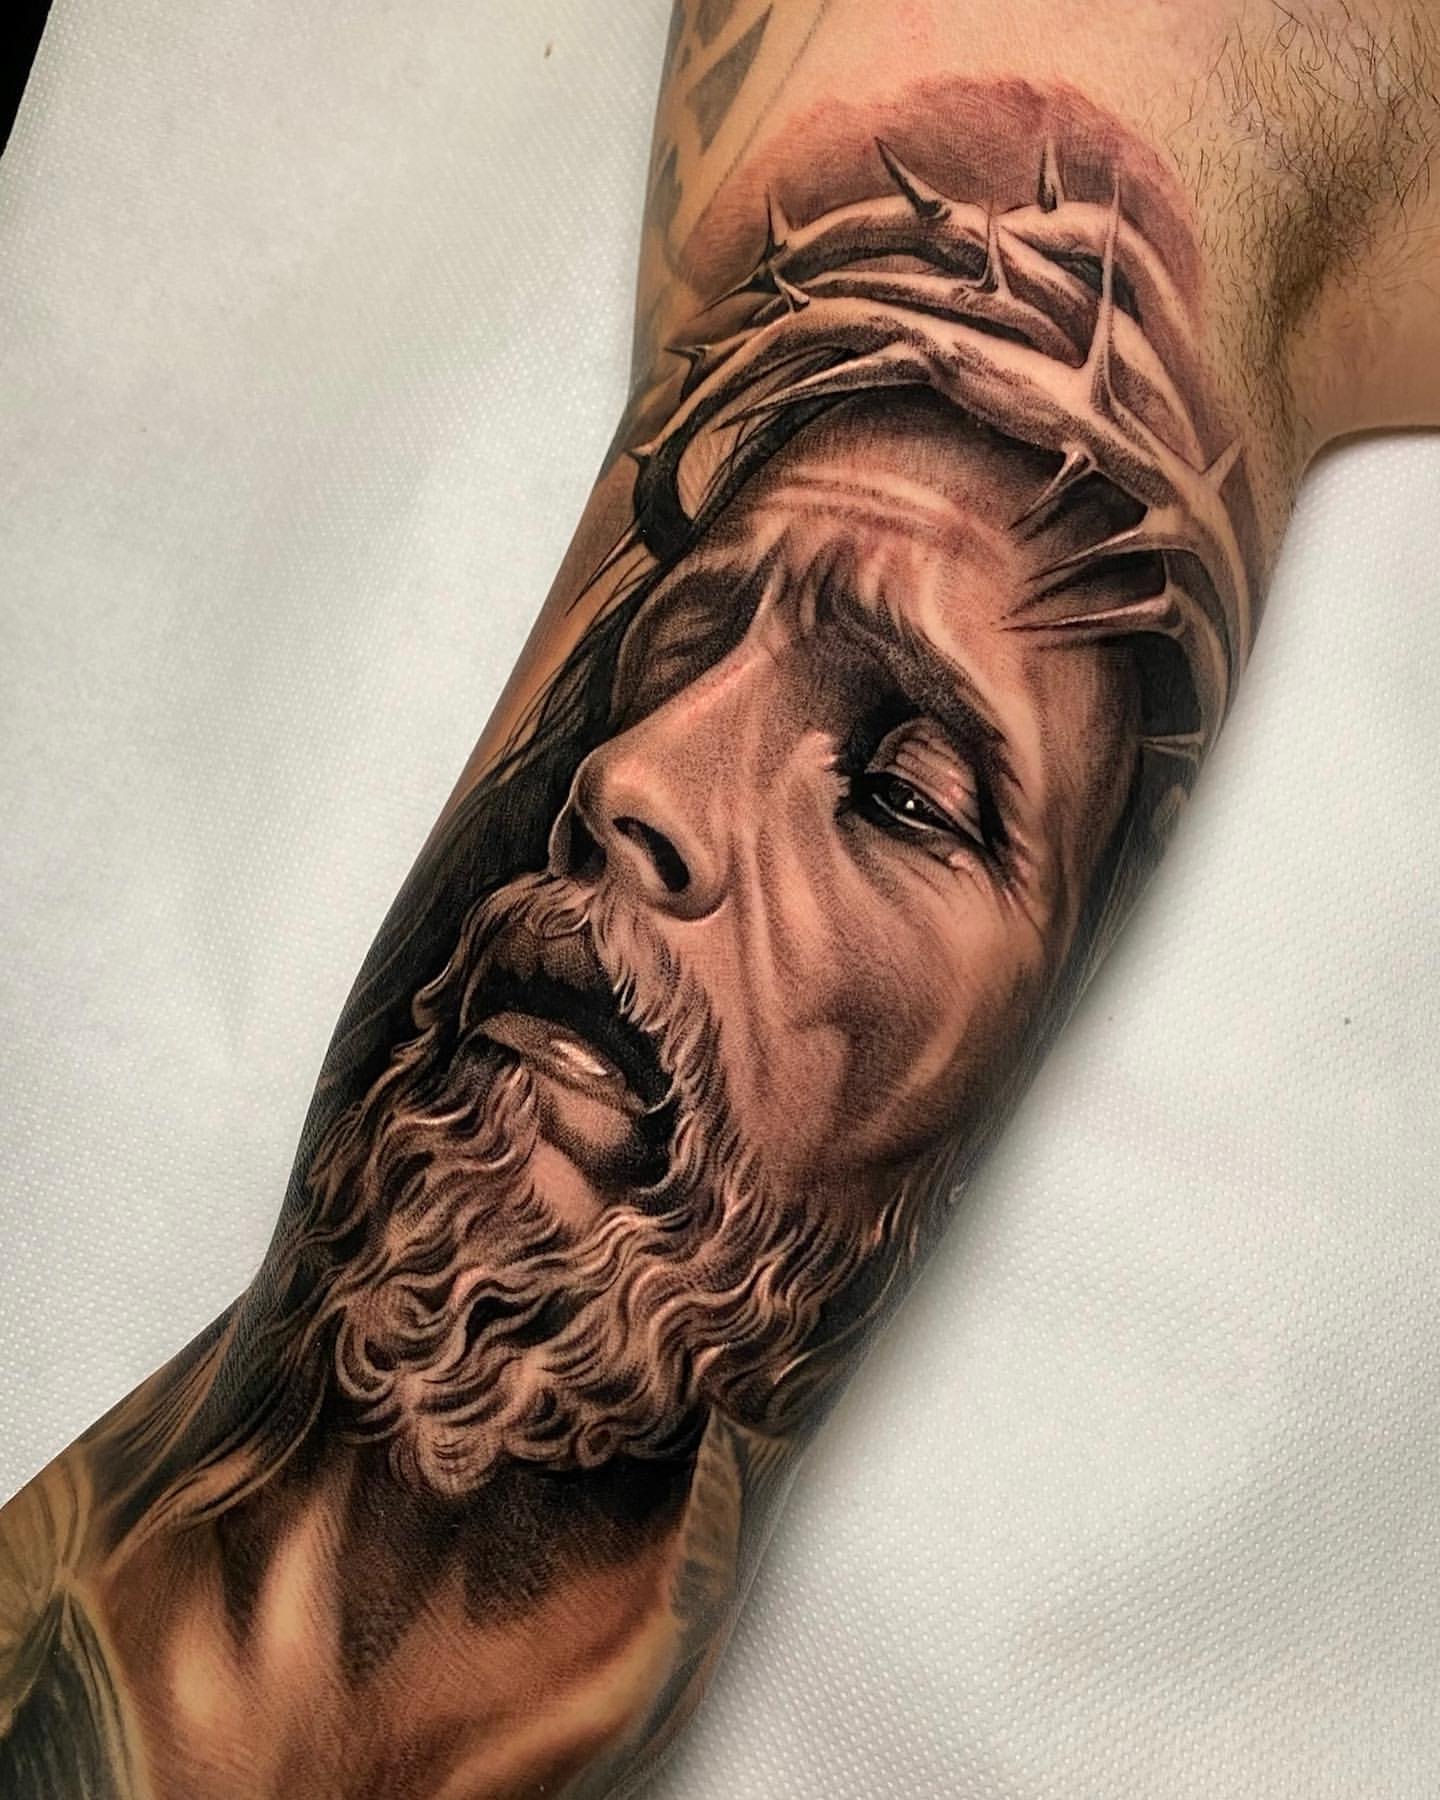 Nicholas Christian Tattoos - One of my favorite Sleeves 💪🎉 * Now booking  for September 2021. DM or email to schedule! • • #vacavilletattoo  #bayareatattooartist #bayareatattoo #tattoolove #blackandgreyrealism  #realismtattoo #blackandgreytattoo #tattoo ...